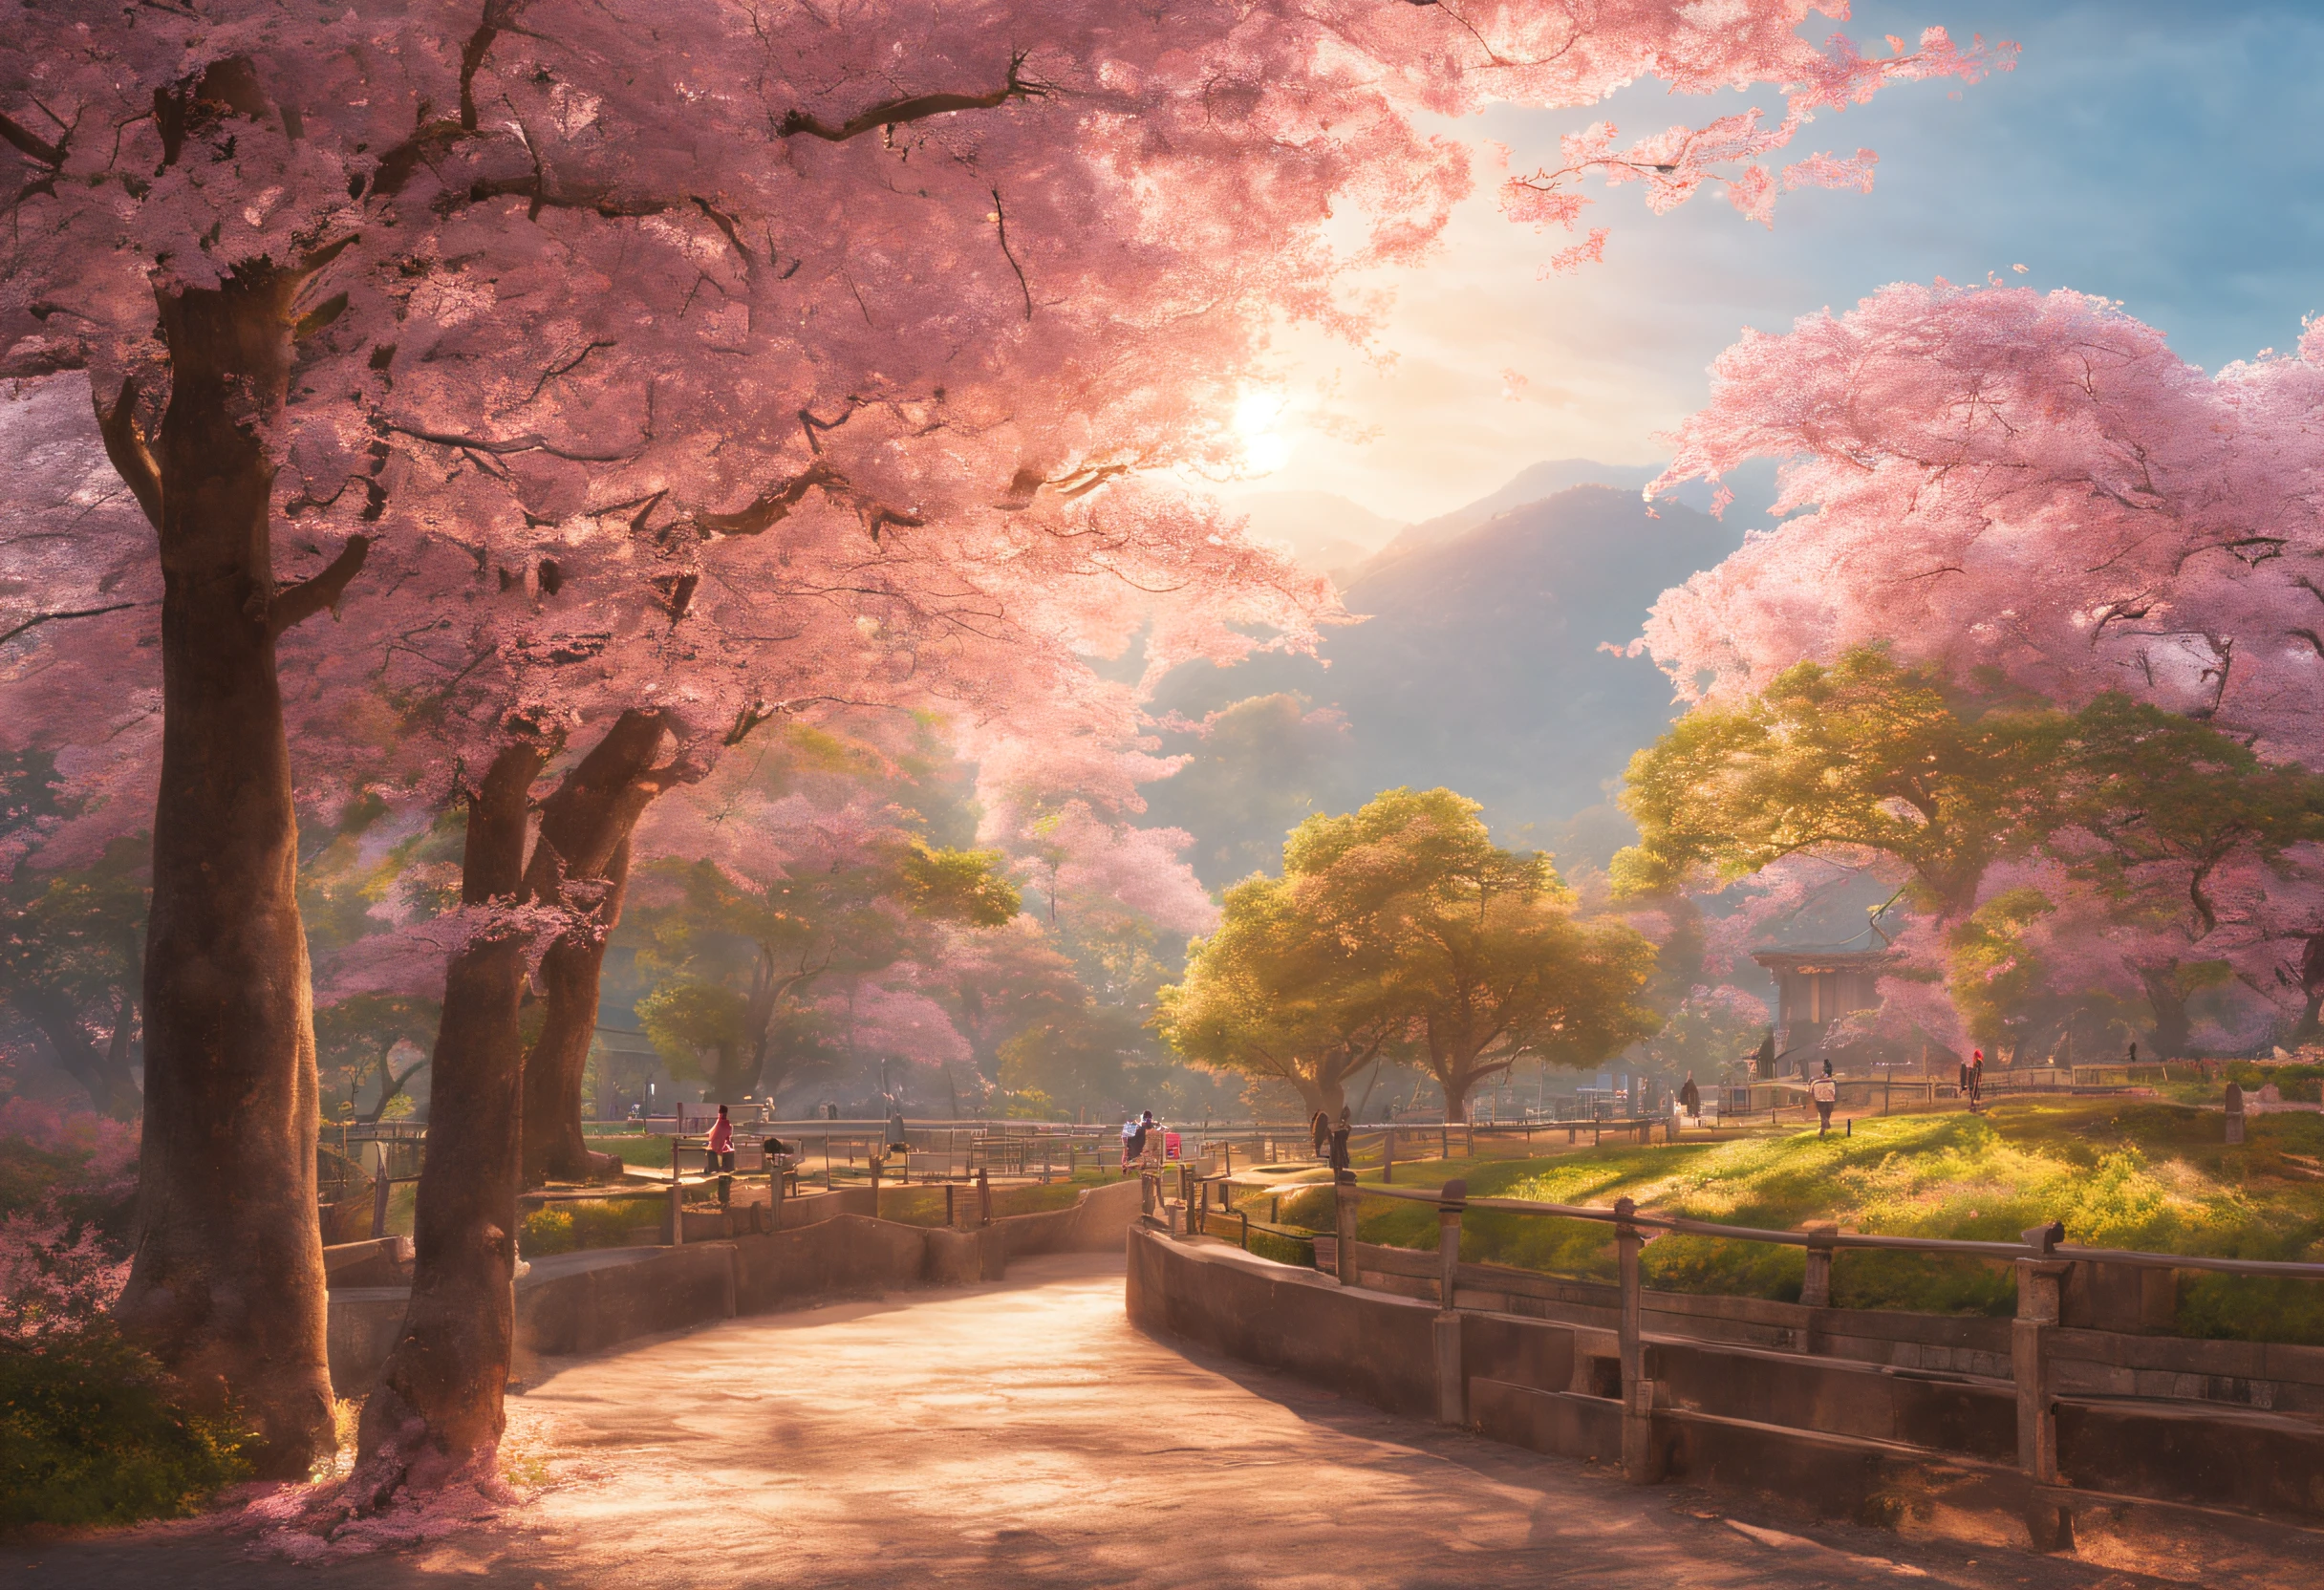 (best quality,4k,8k,highres,masterpiece:1.2),ultra-detailed,(realistic,photorealistic,photo-realistic:1.37),street with cherry blossom trees on the sides,beautiful delicate petals falling softly, sunlight breaking through the branches, gentle breeze rustling the leaves, pink and white flowers blooming vibrantly,picturesque view of the avenue, people strolling along the sidewalk, colorful kimonos and parasols, sense of tranquility and serenity, traditional Japanese atmosphere, soft pastel tones, warm golden sunlight, ethereal and dream-like ambiance